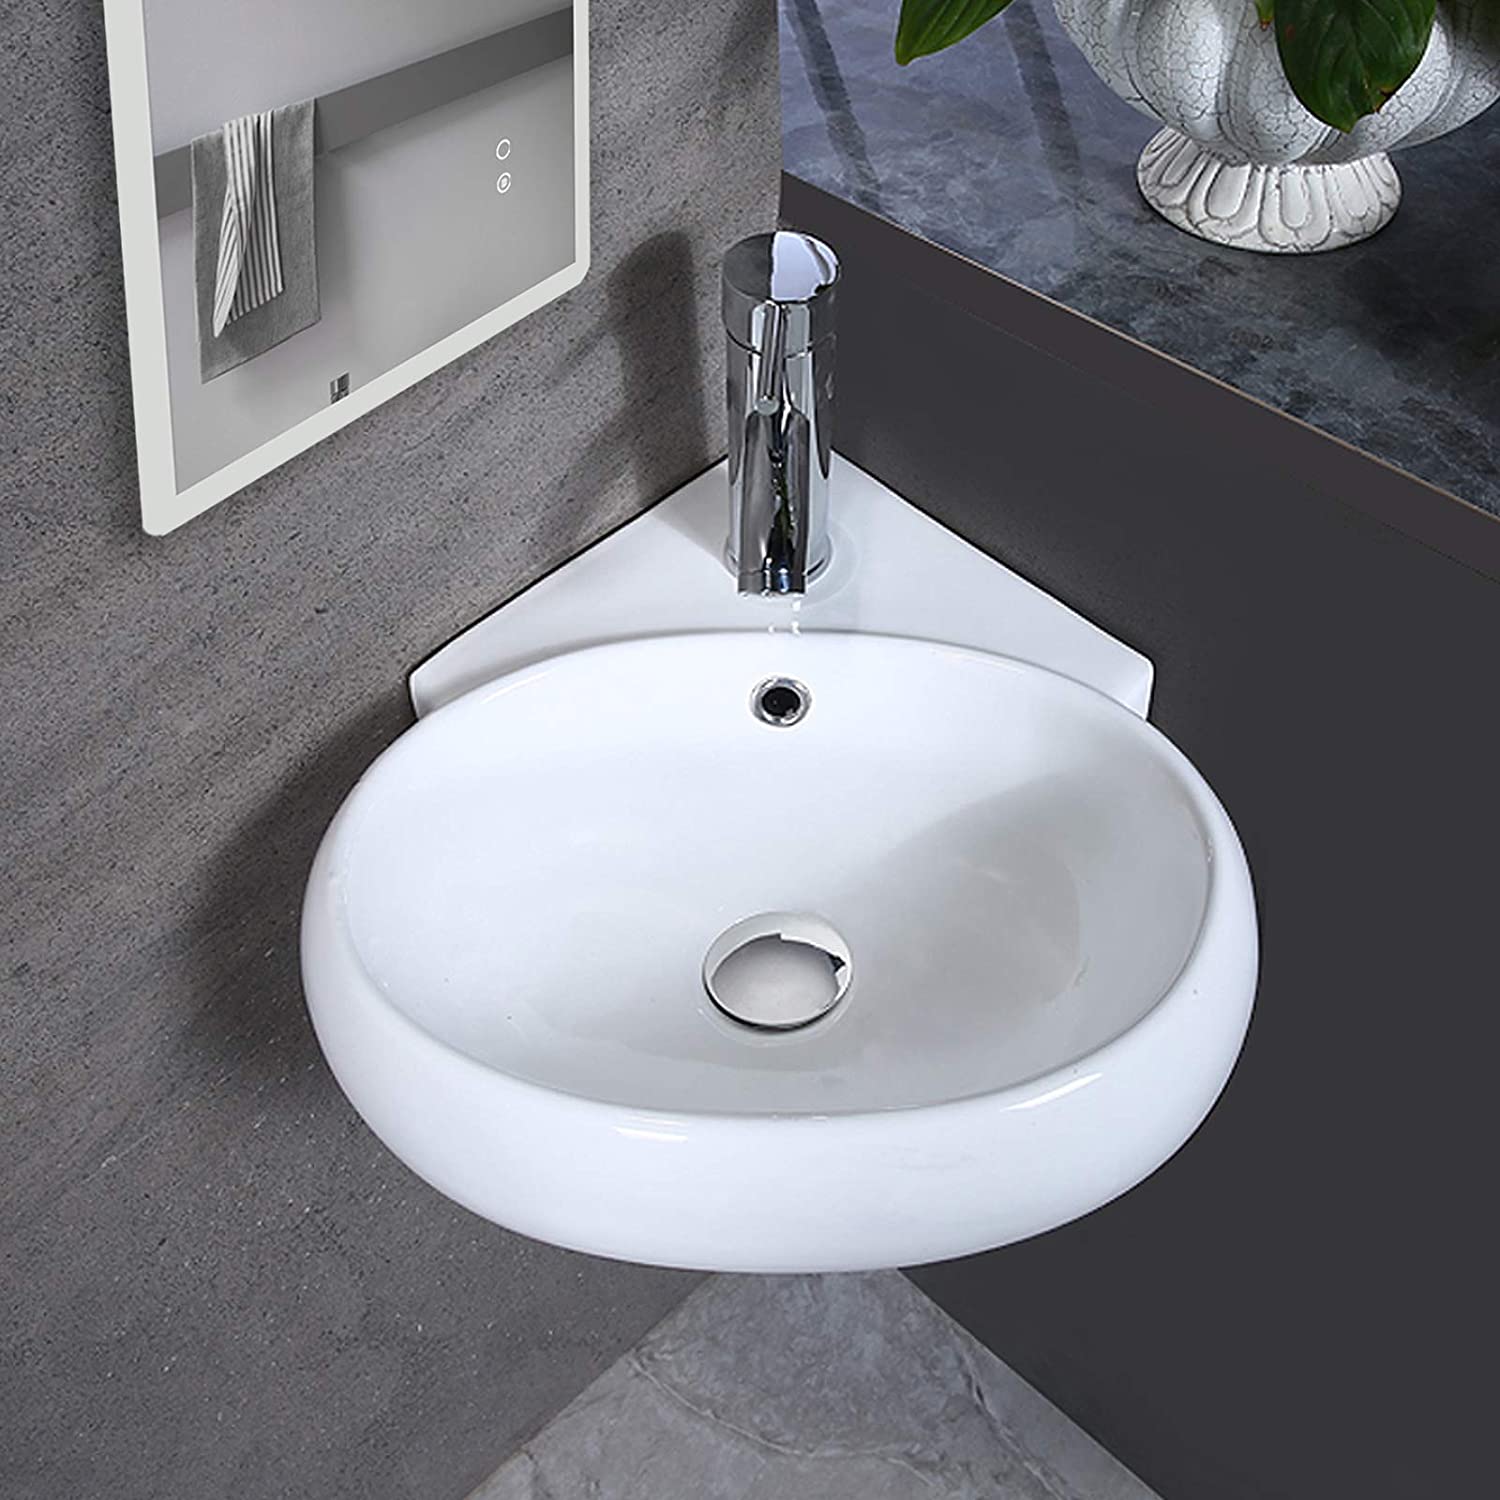 Buy Elecwish White Ceramic Bathroom Sink Triangle Bathroom Wall Mount Sink Corner Sink With Single Faucet Hole And Overflow Online In Indonesia 773611690